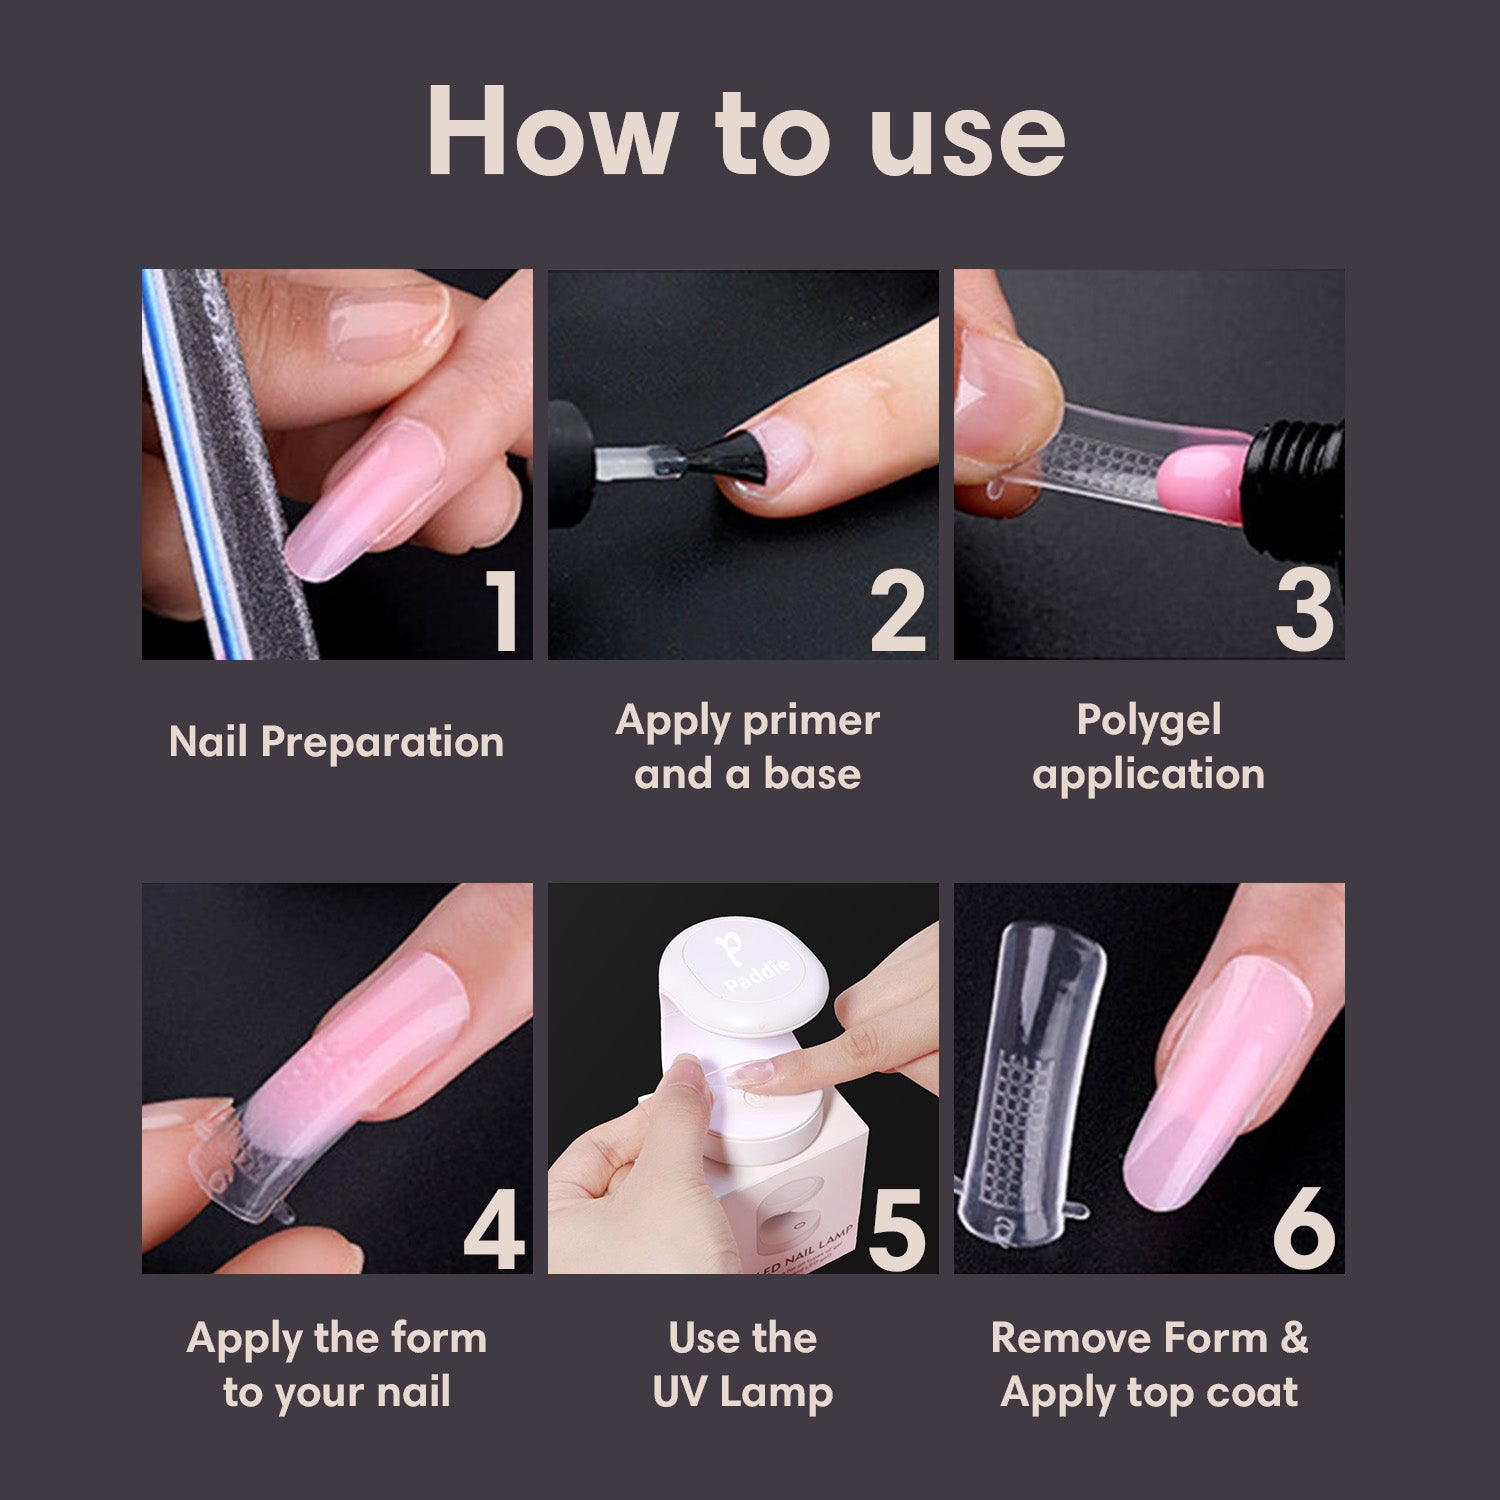 To use Polygel, start with Nail preparation. Apply a base coat on the natural nail. Choose the perfect dual forms for your nails. Apply polygel + cure for 90 seconds. File to the preferred shape. Apply a top coat. Cure for 90 seconds